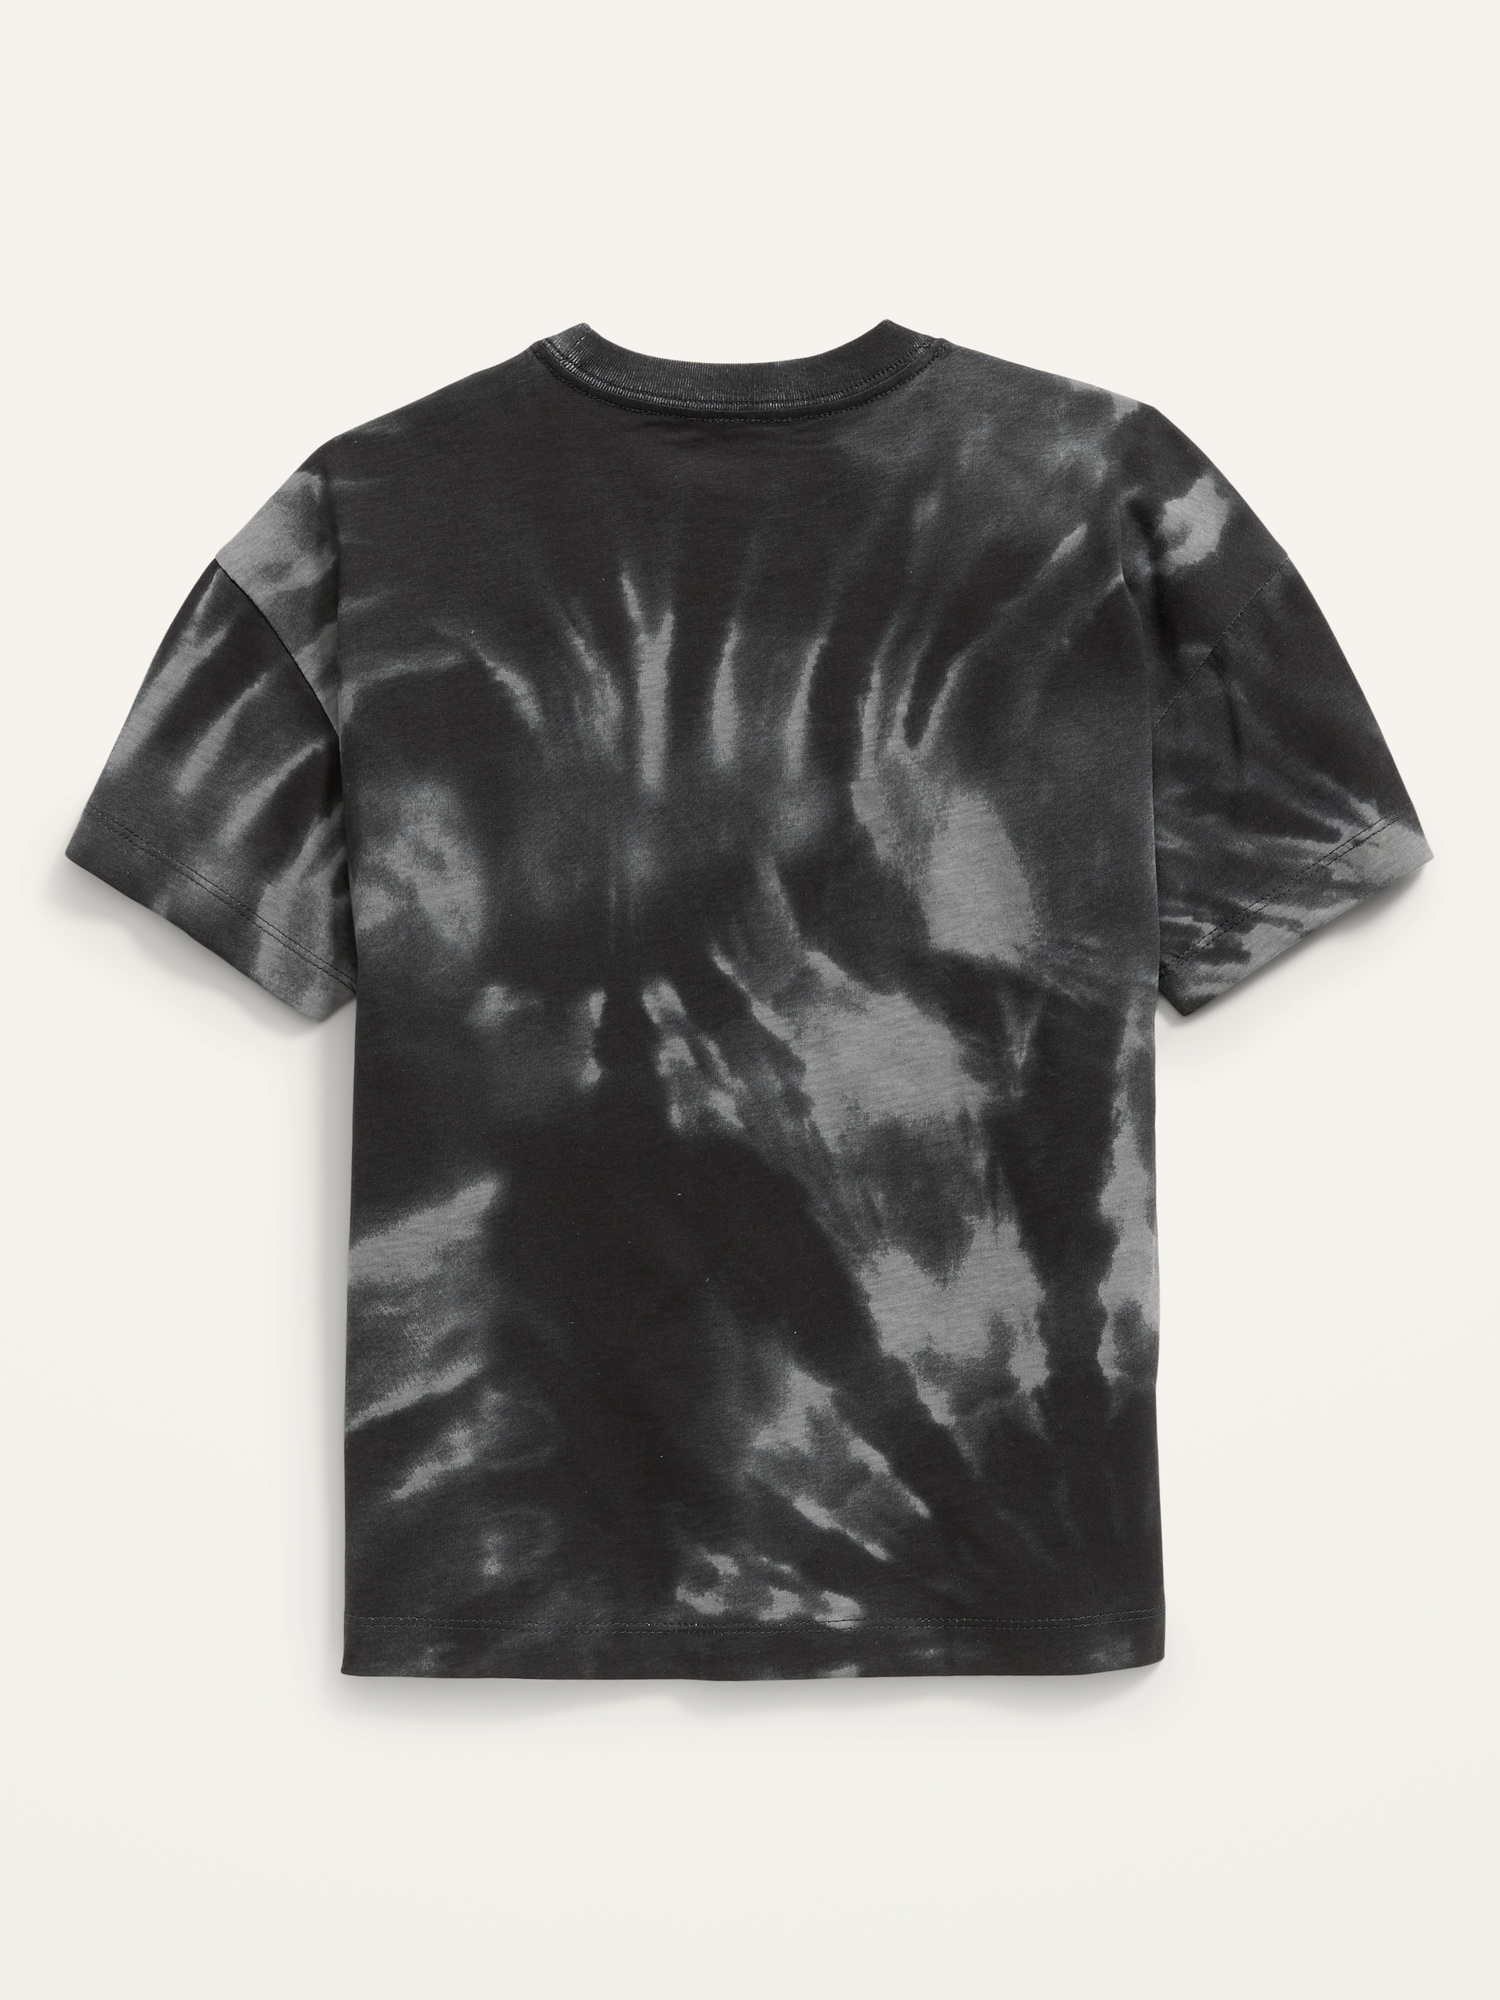 Black to white fade Graphic T-Shirt for Sale by Holly-Pops